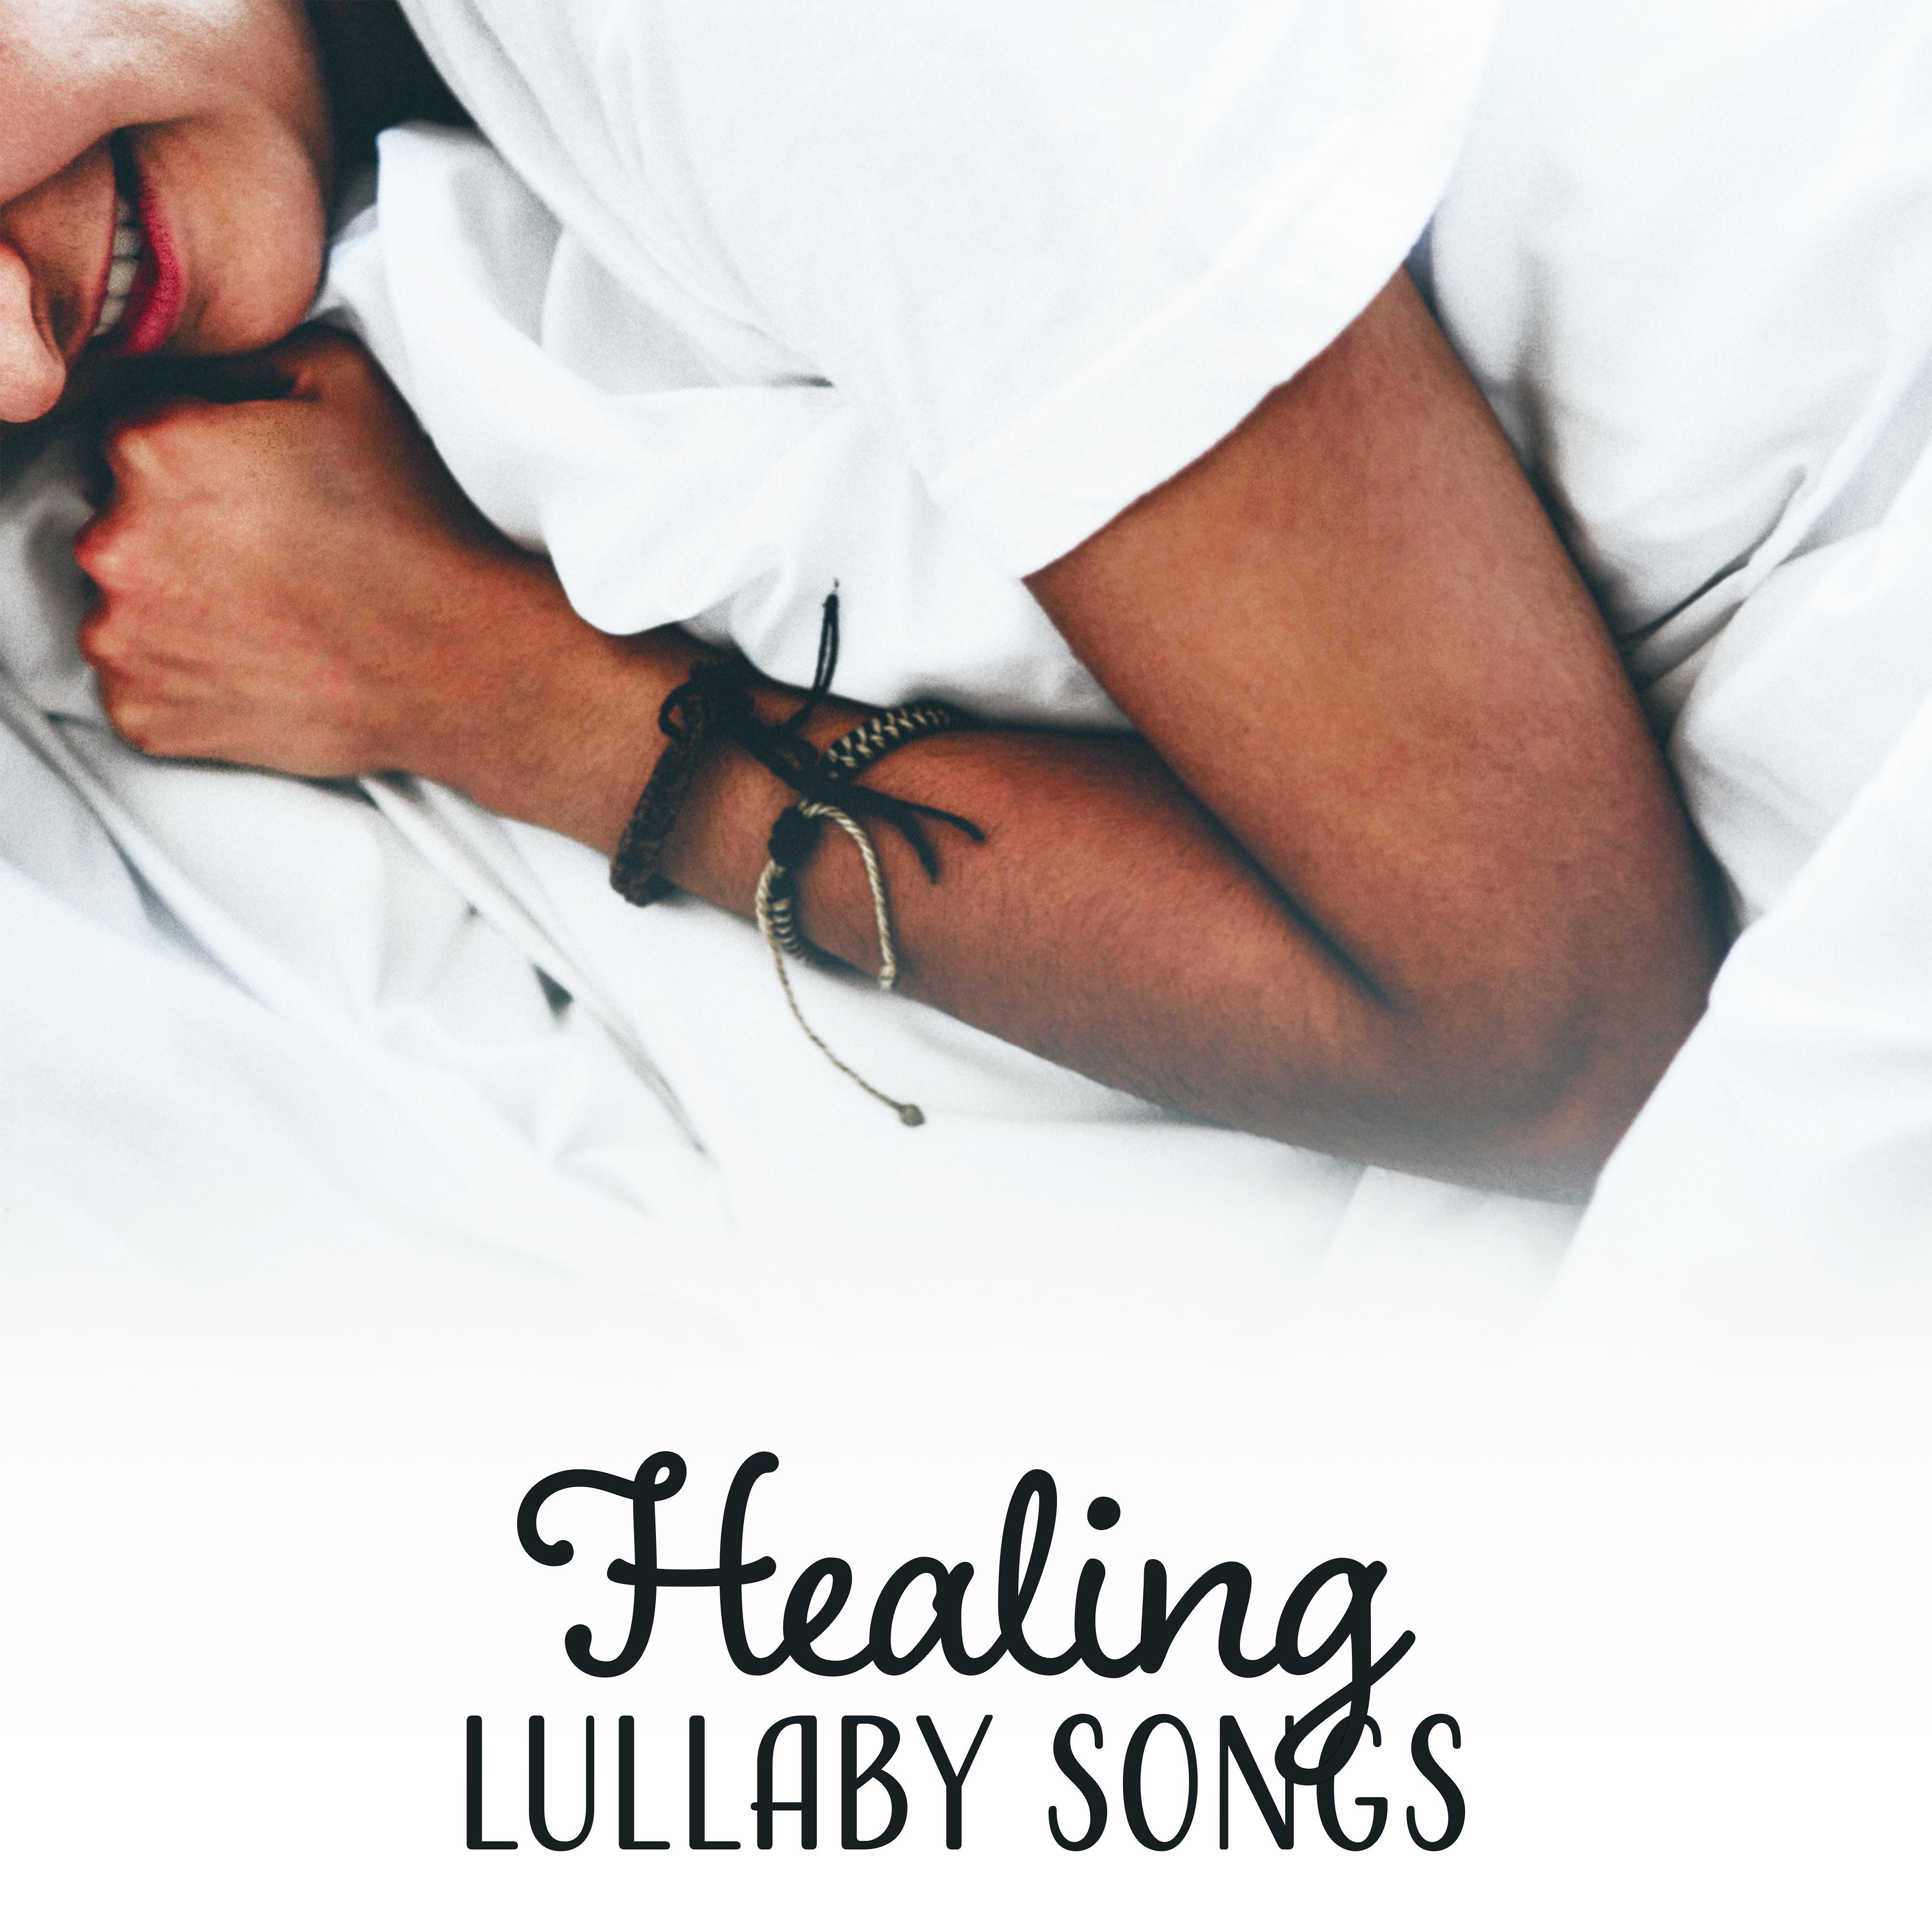 Healing Lullaby Songs – Peaceful Melodies, Nature Sounds, Music for Deep Sleep, Relax, Cure Insomnia